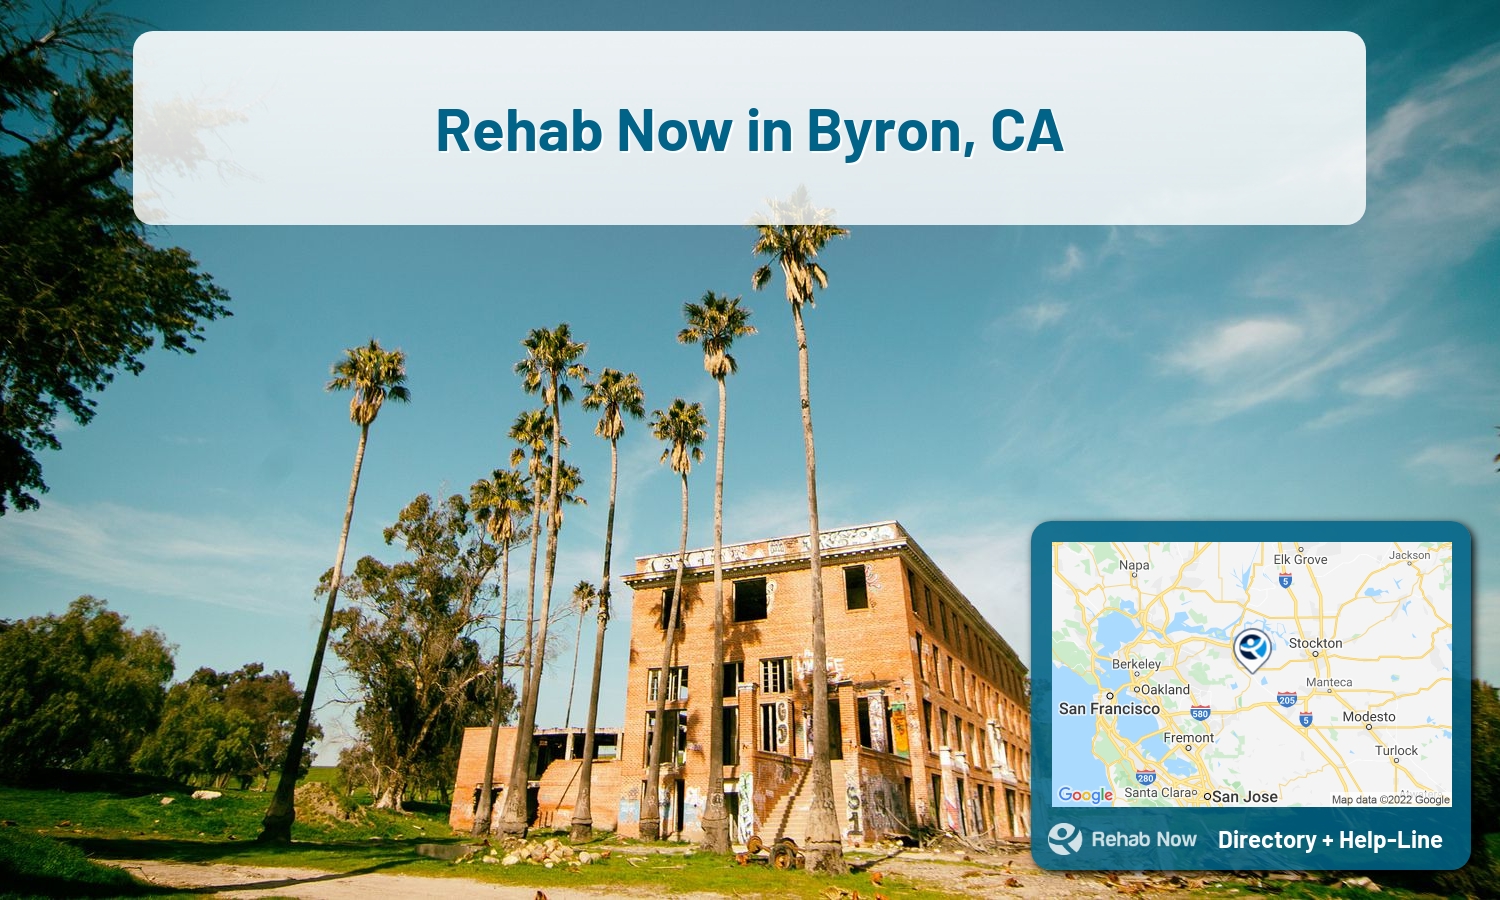 Drug rehab and alcohol treatment services nearby Byron, CA. Need help choosing a treatment program? Call our free hotline!